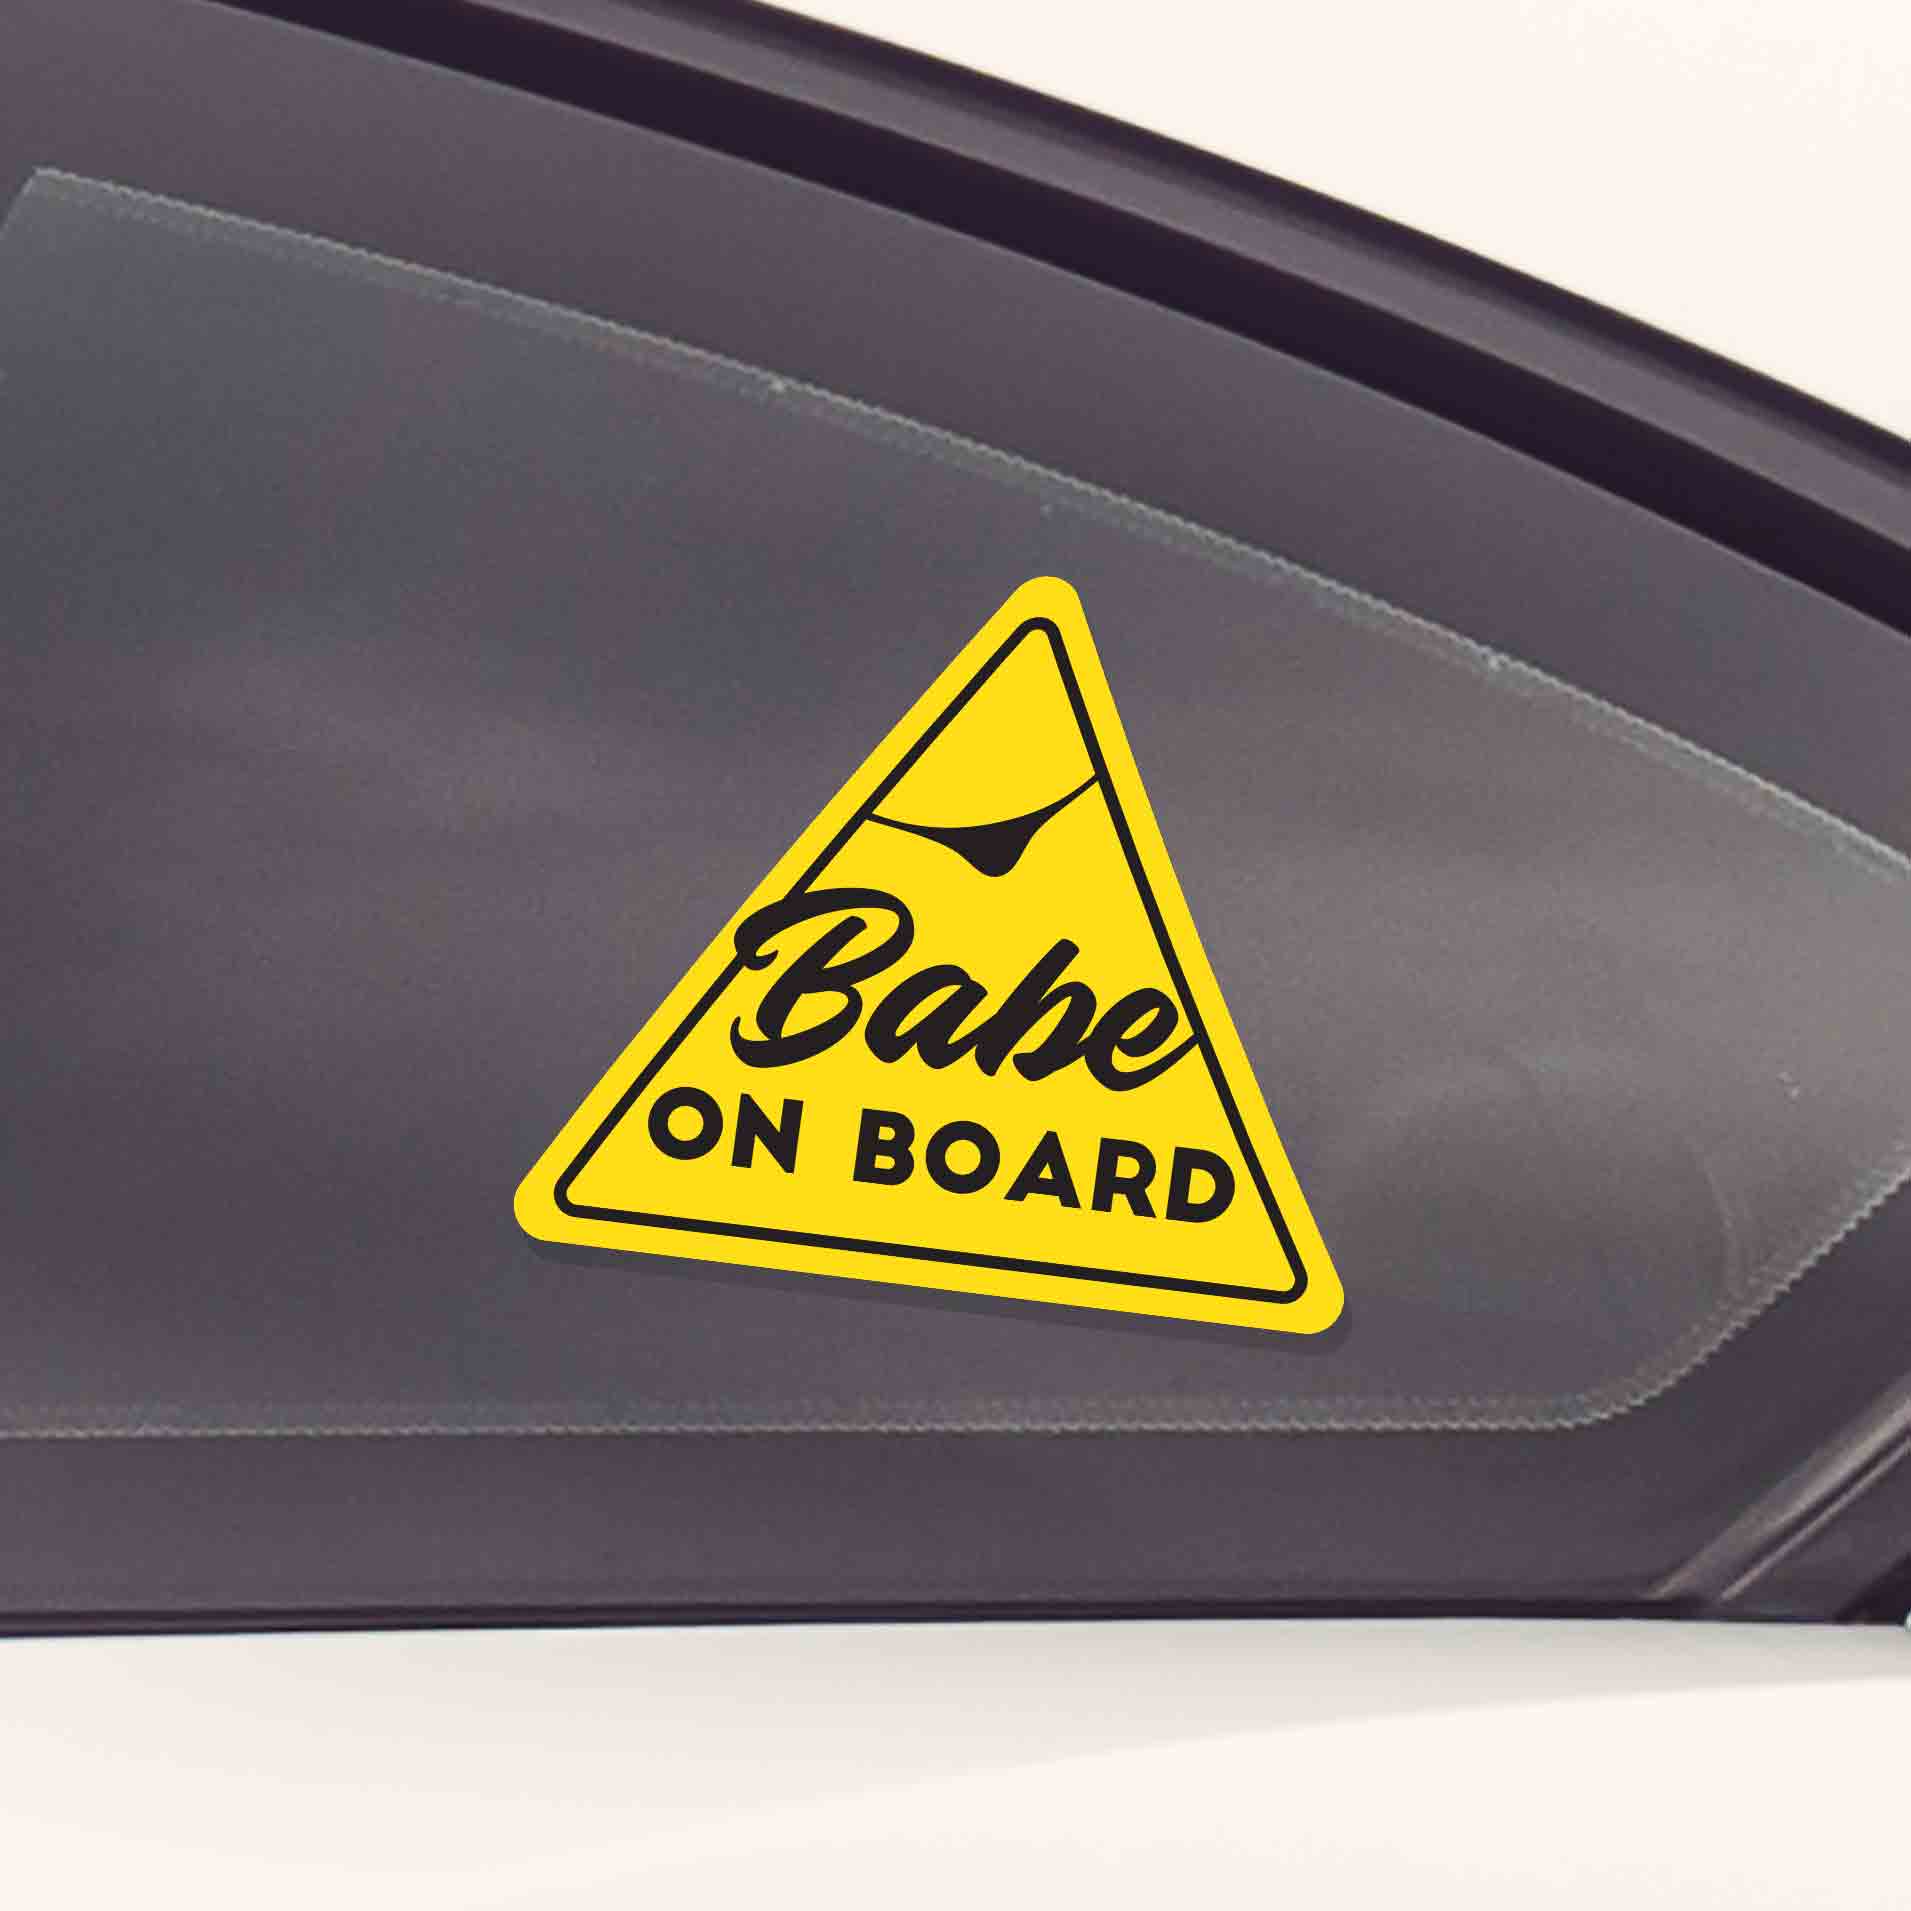 Babe on Board is a must-have sticker for cars or trucks with ladies on board.